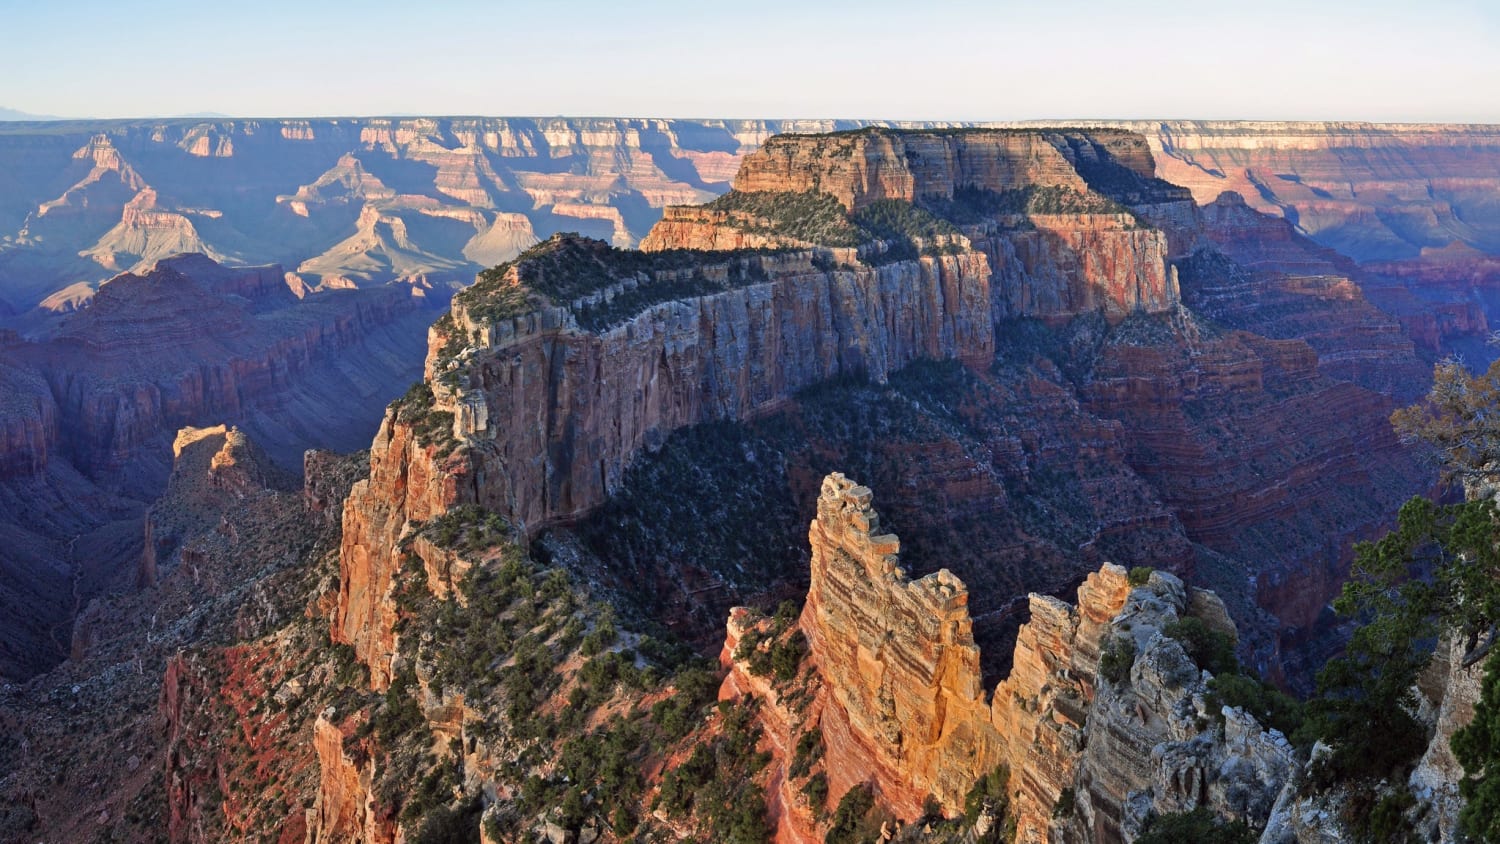 From ancient trees to towering volcanoes, take in scientific wonders at national parks